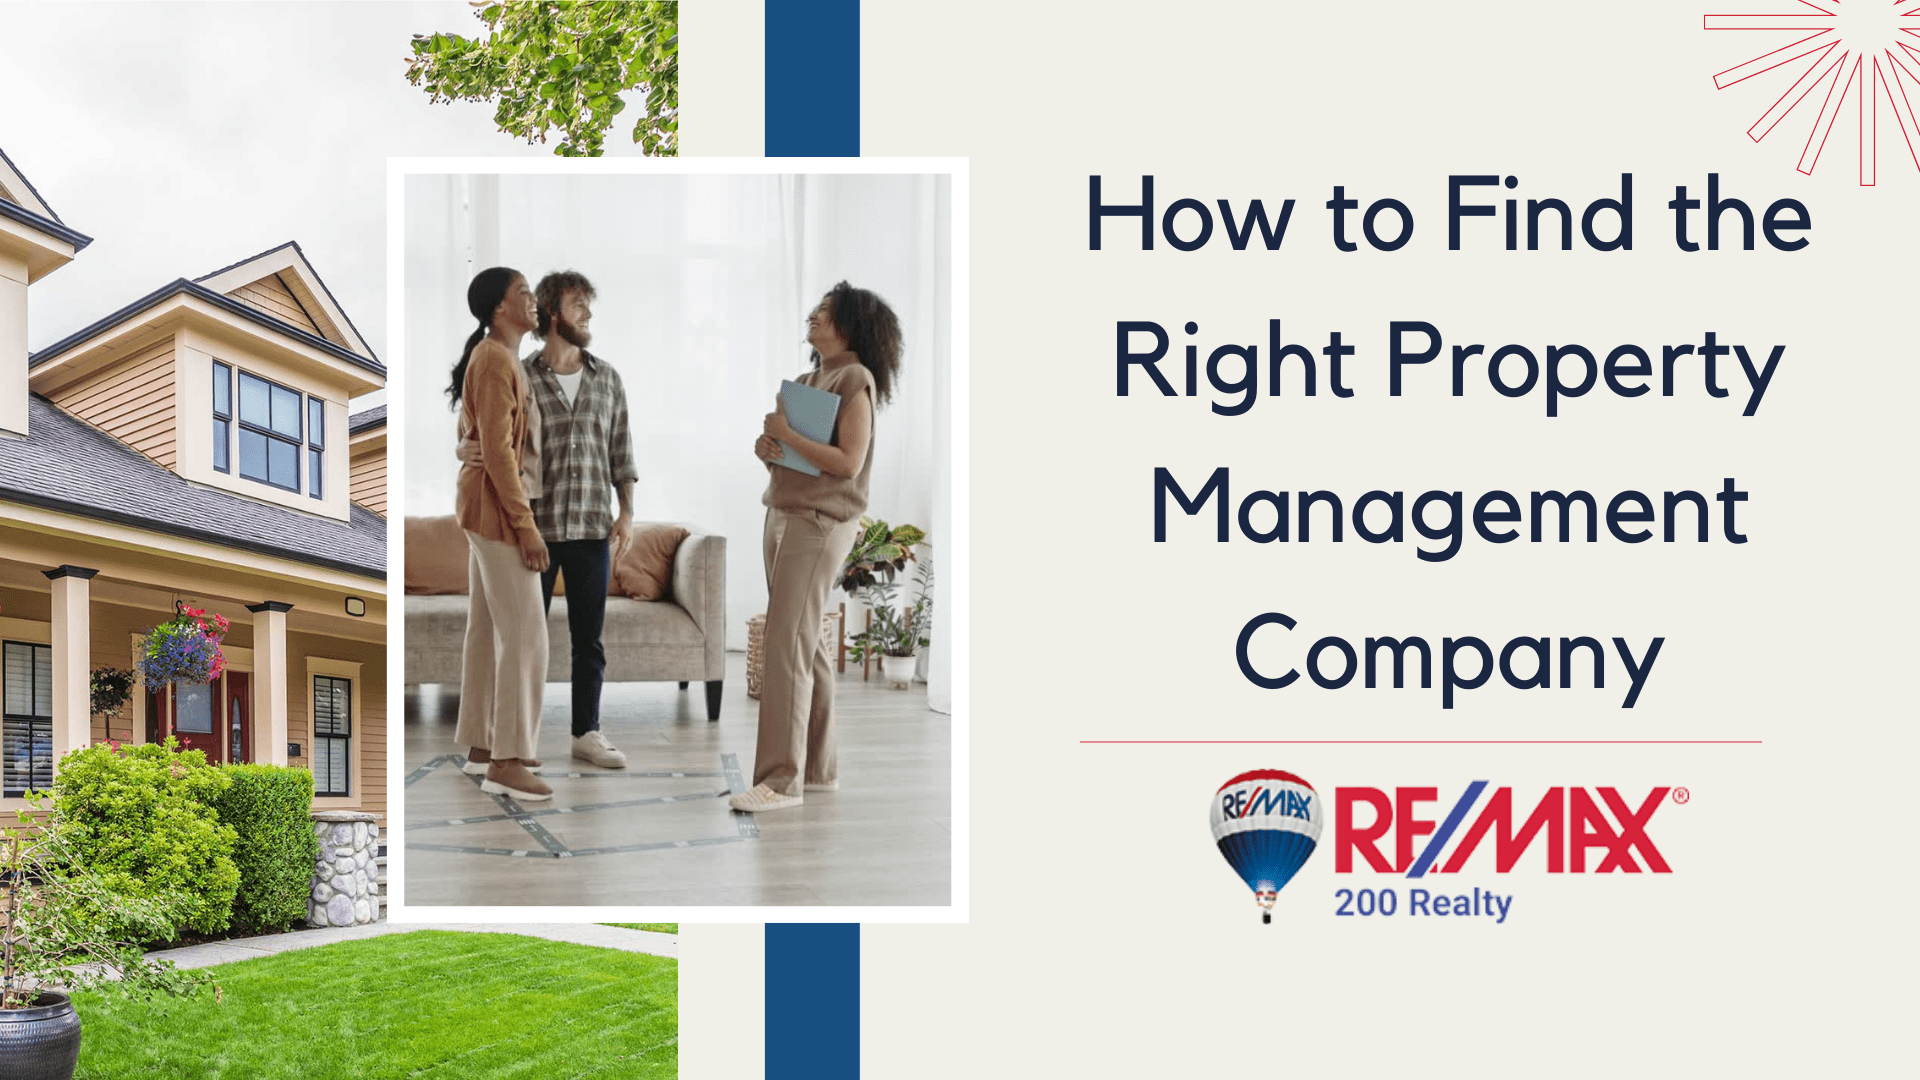 How to Find the Right Property Management Company